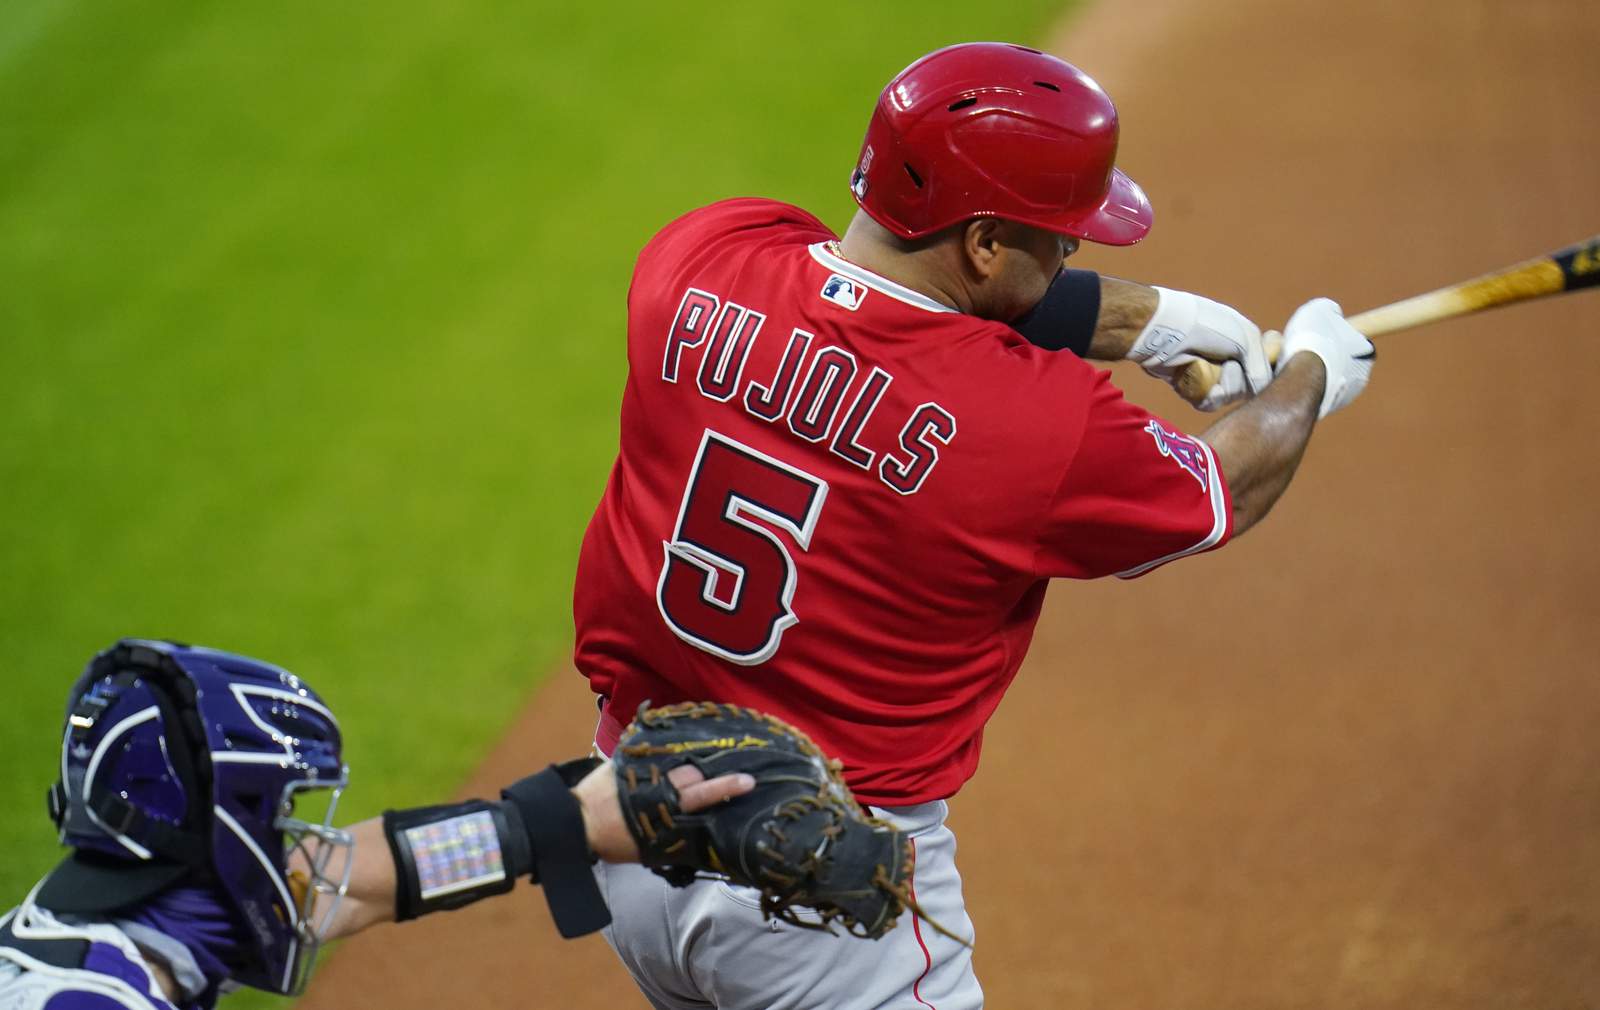 Pujols hits 660th career homer, ties Mays for 5th place